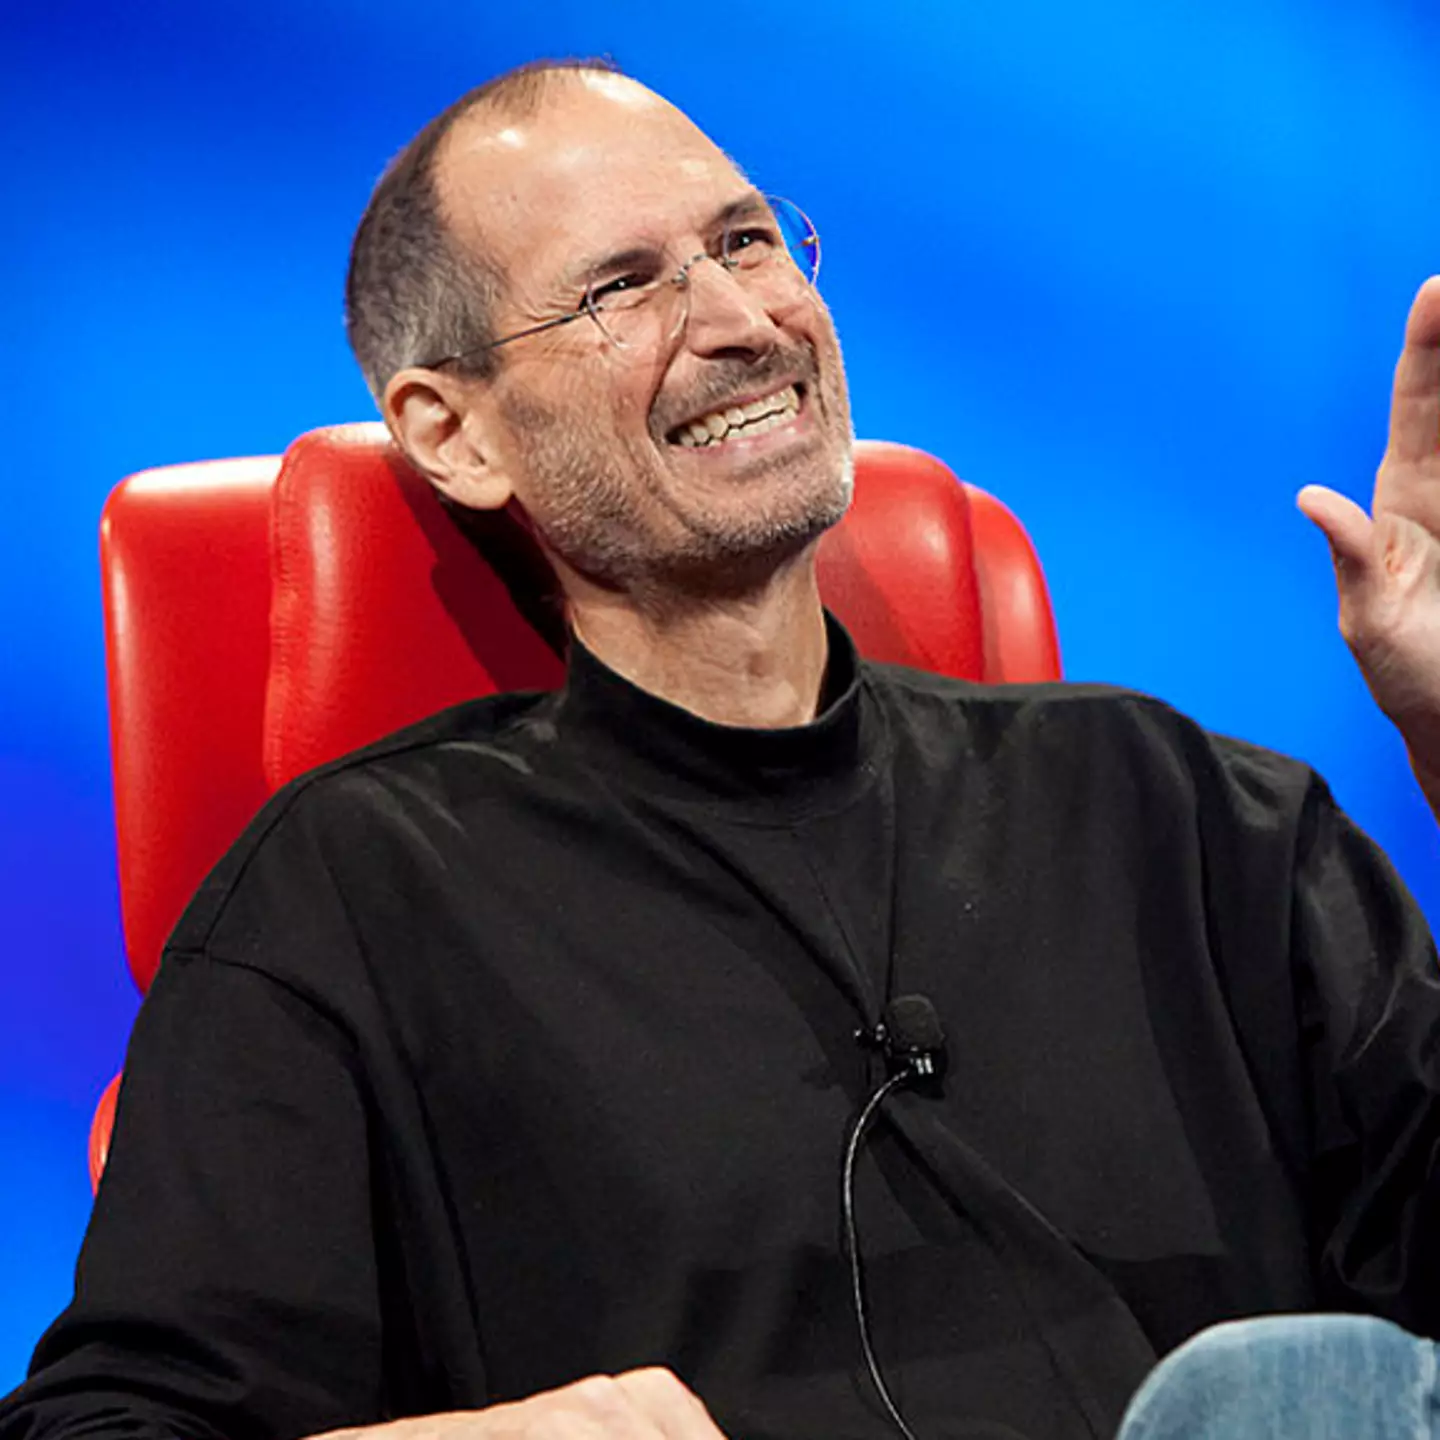 Steve Jobs started every day by asking himself this brilliant question